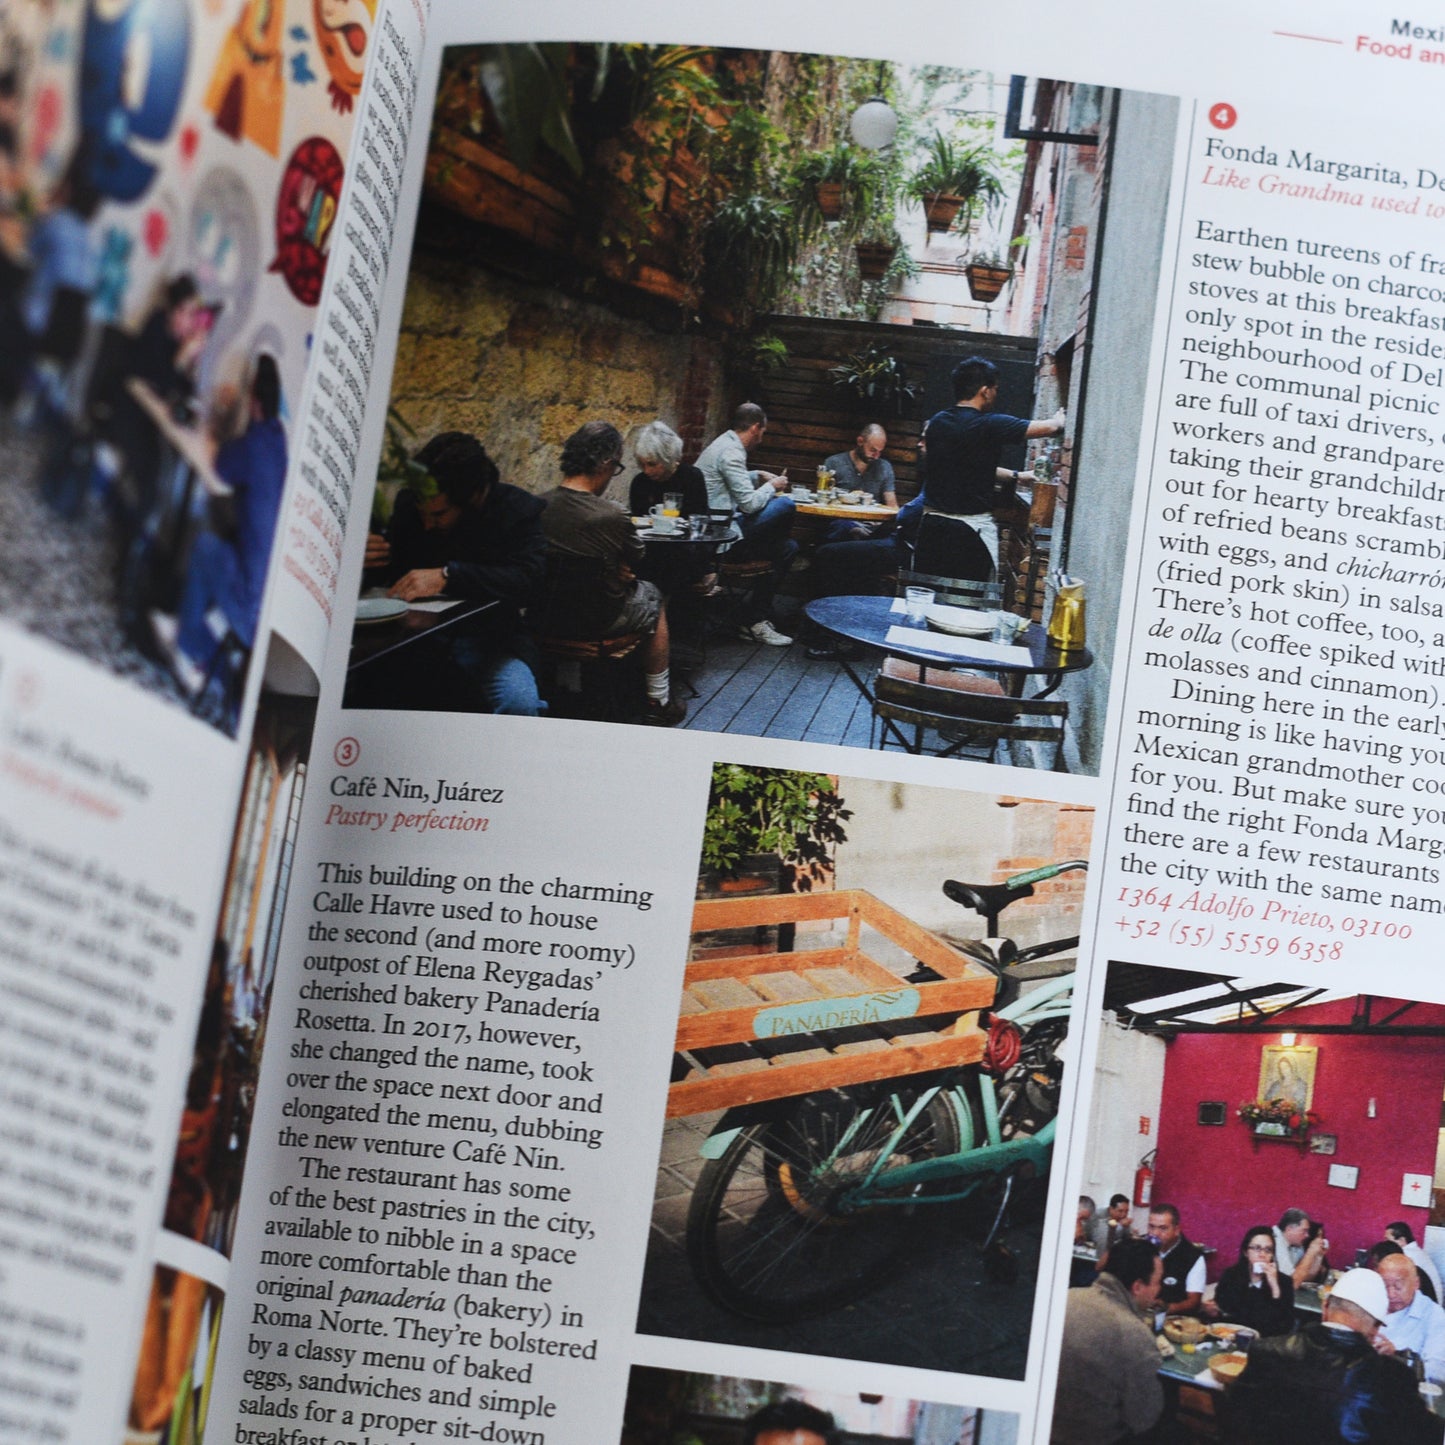 The Monocle Travel Guide Series Mexico City